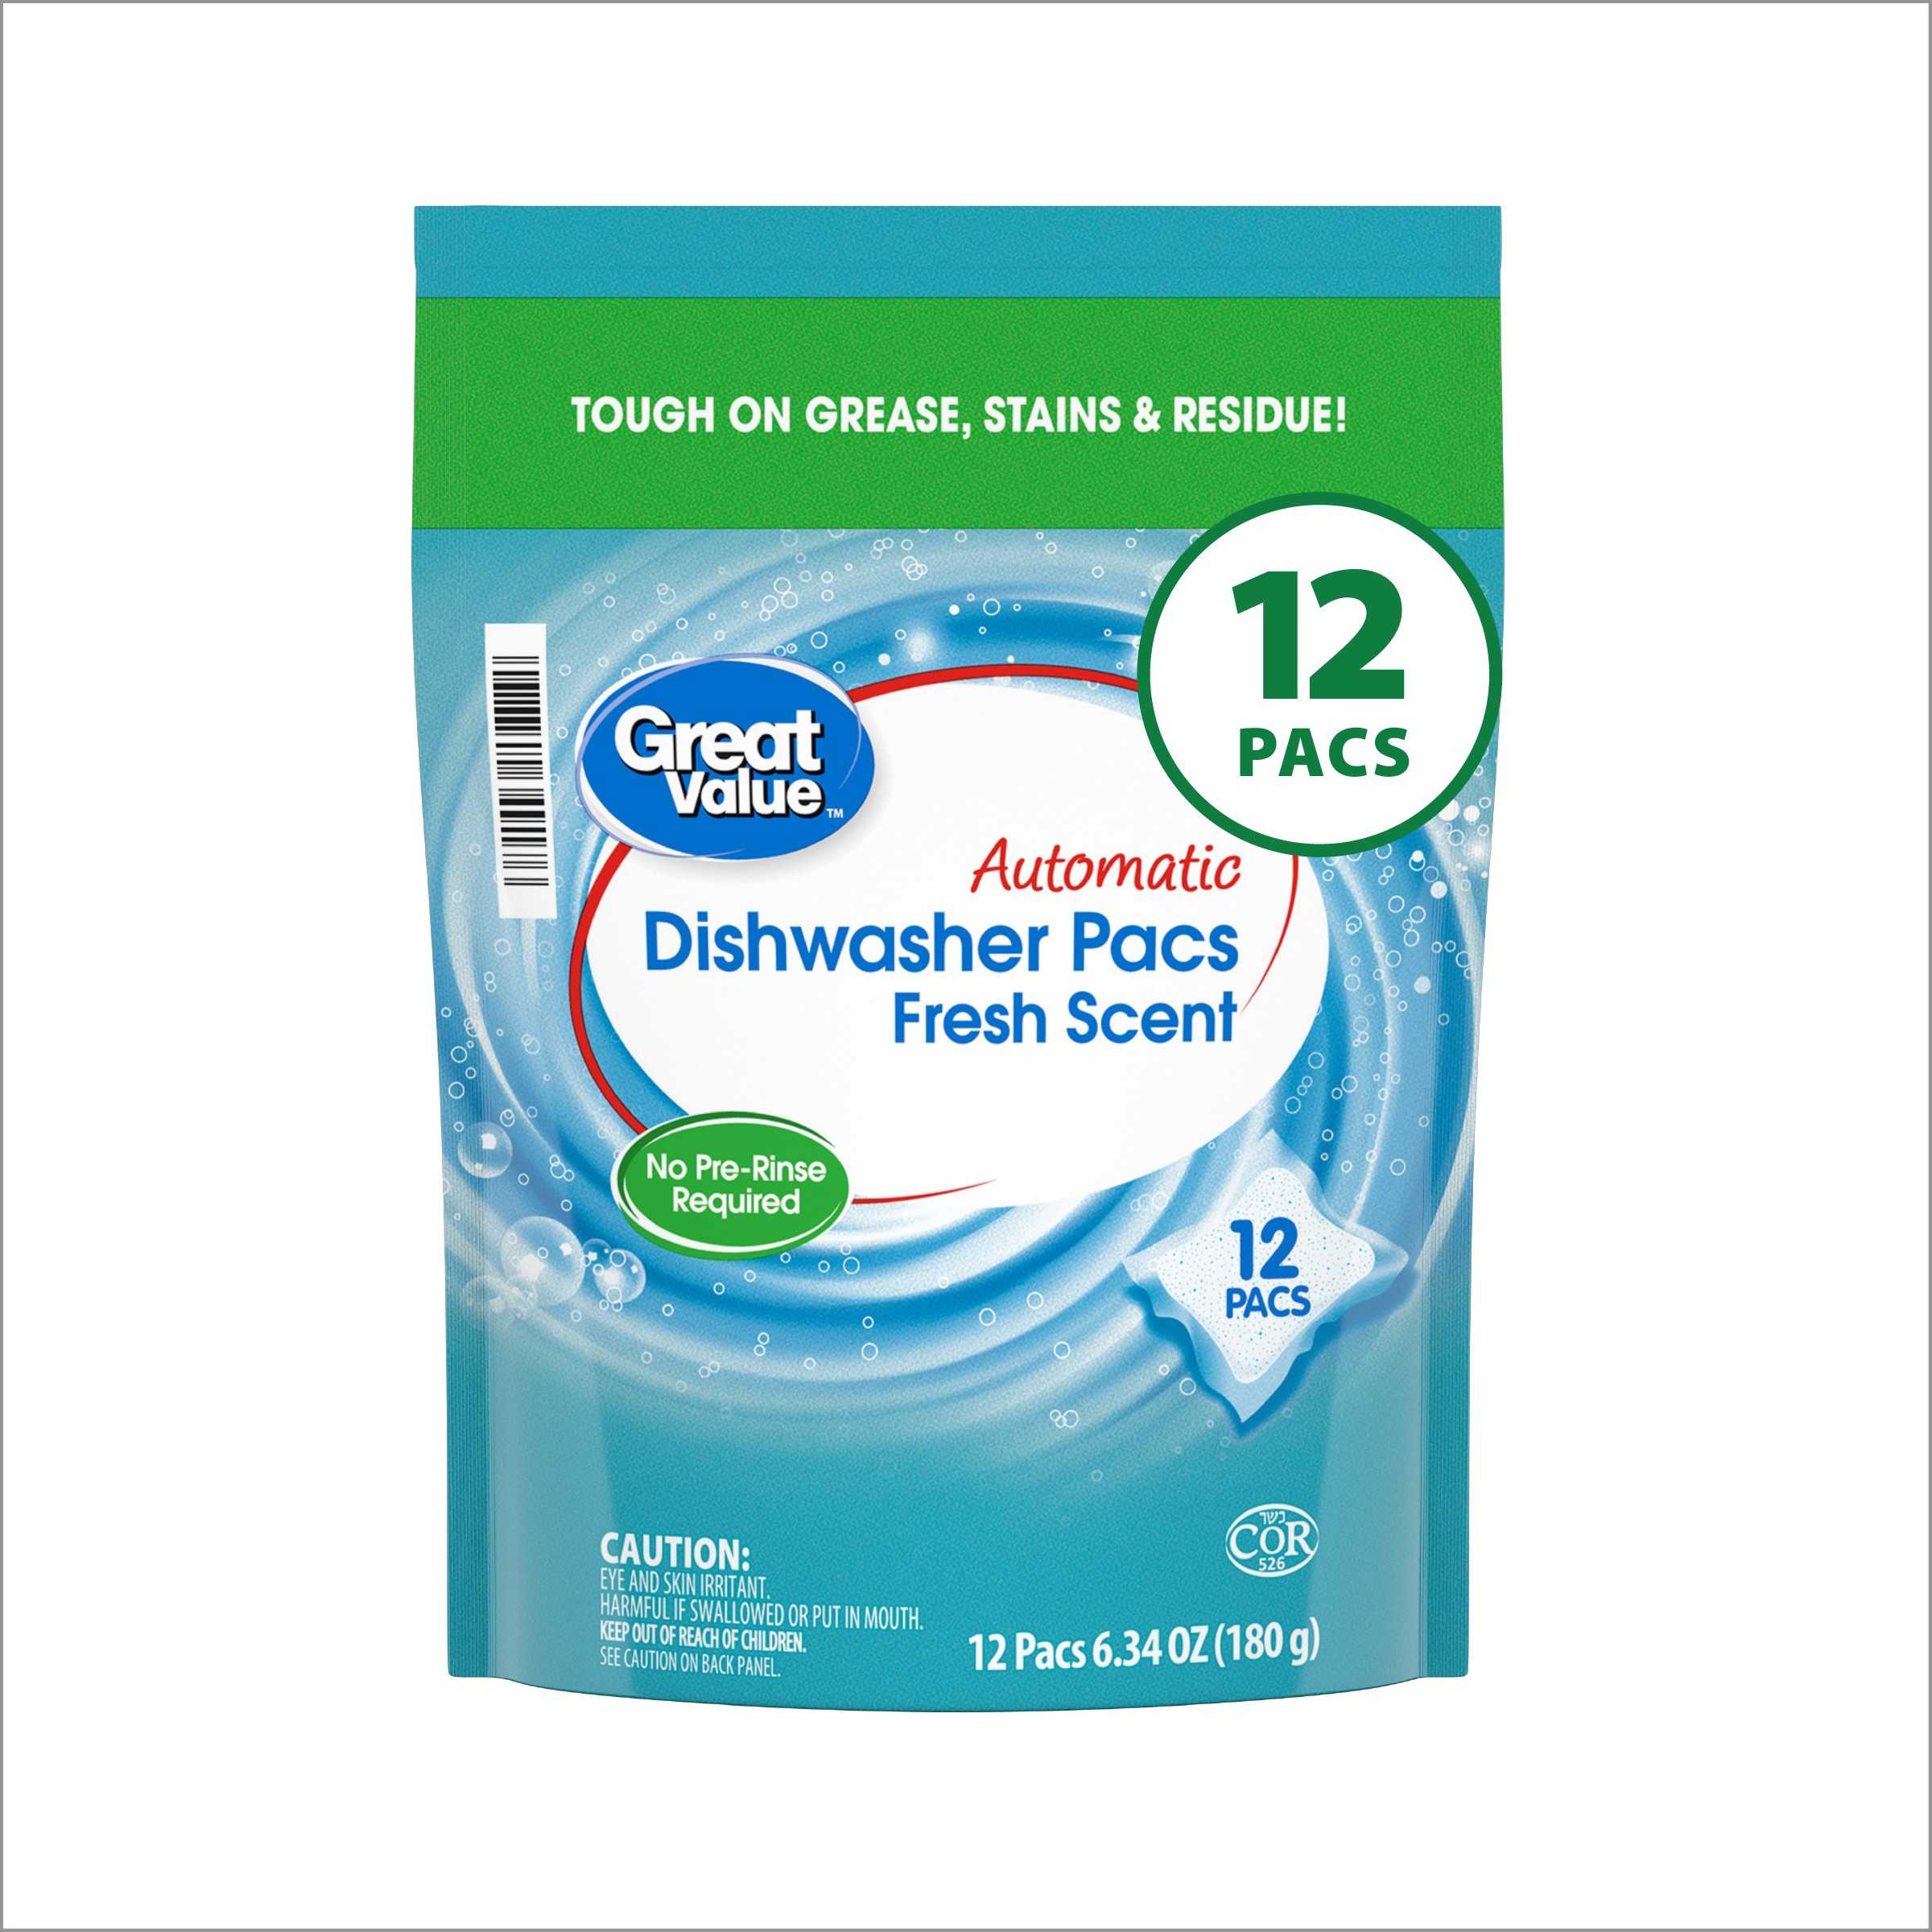 Great Value Automatic Dishwasher Pacs, Fresh Scent, 12 Count